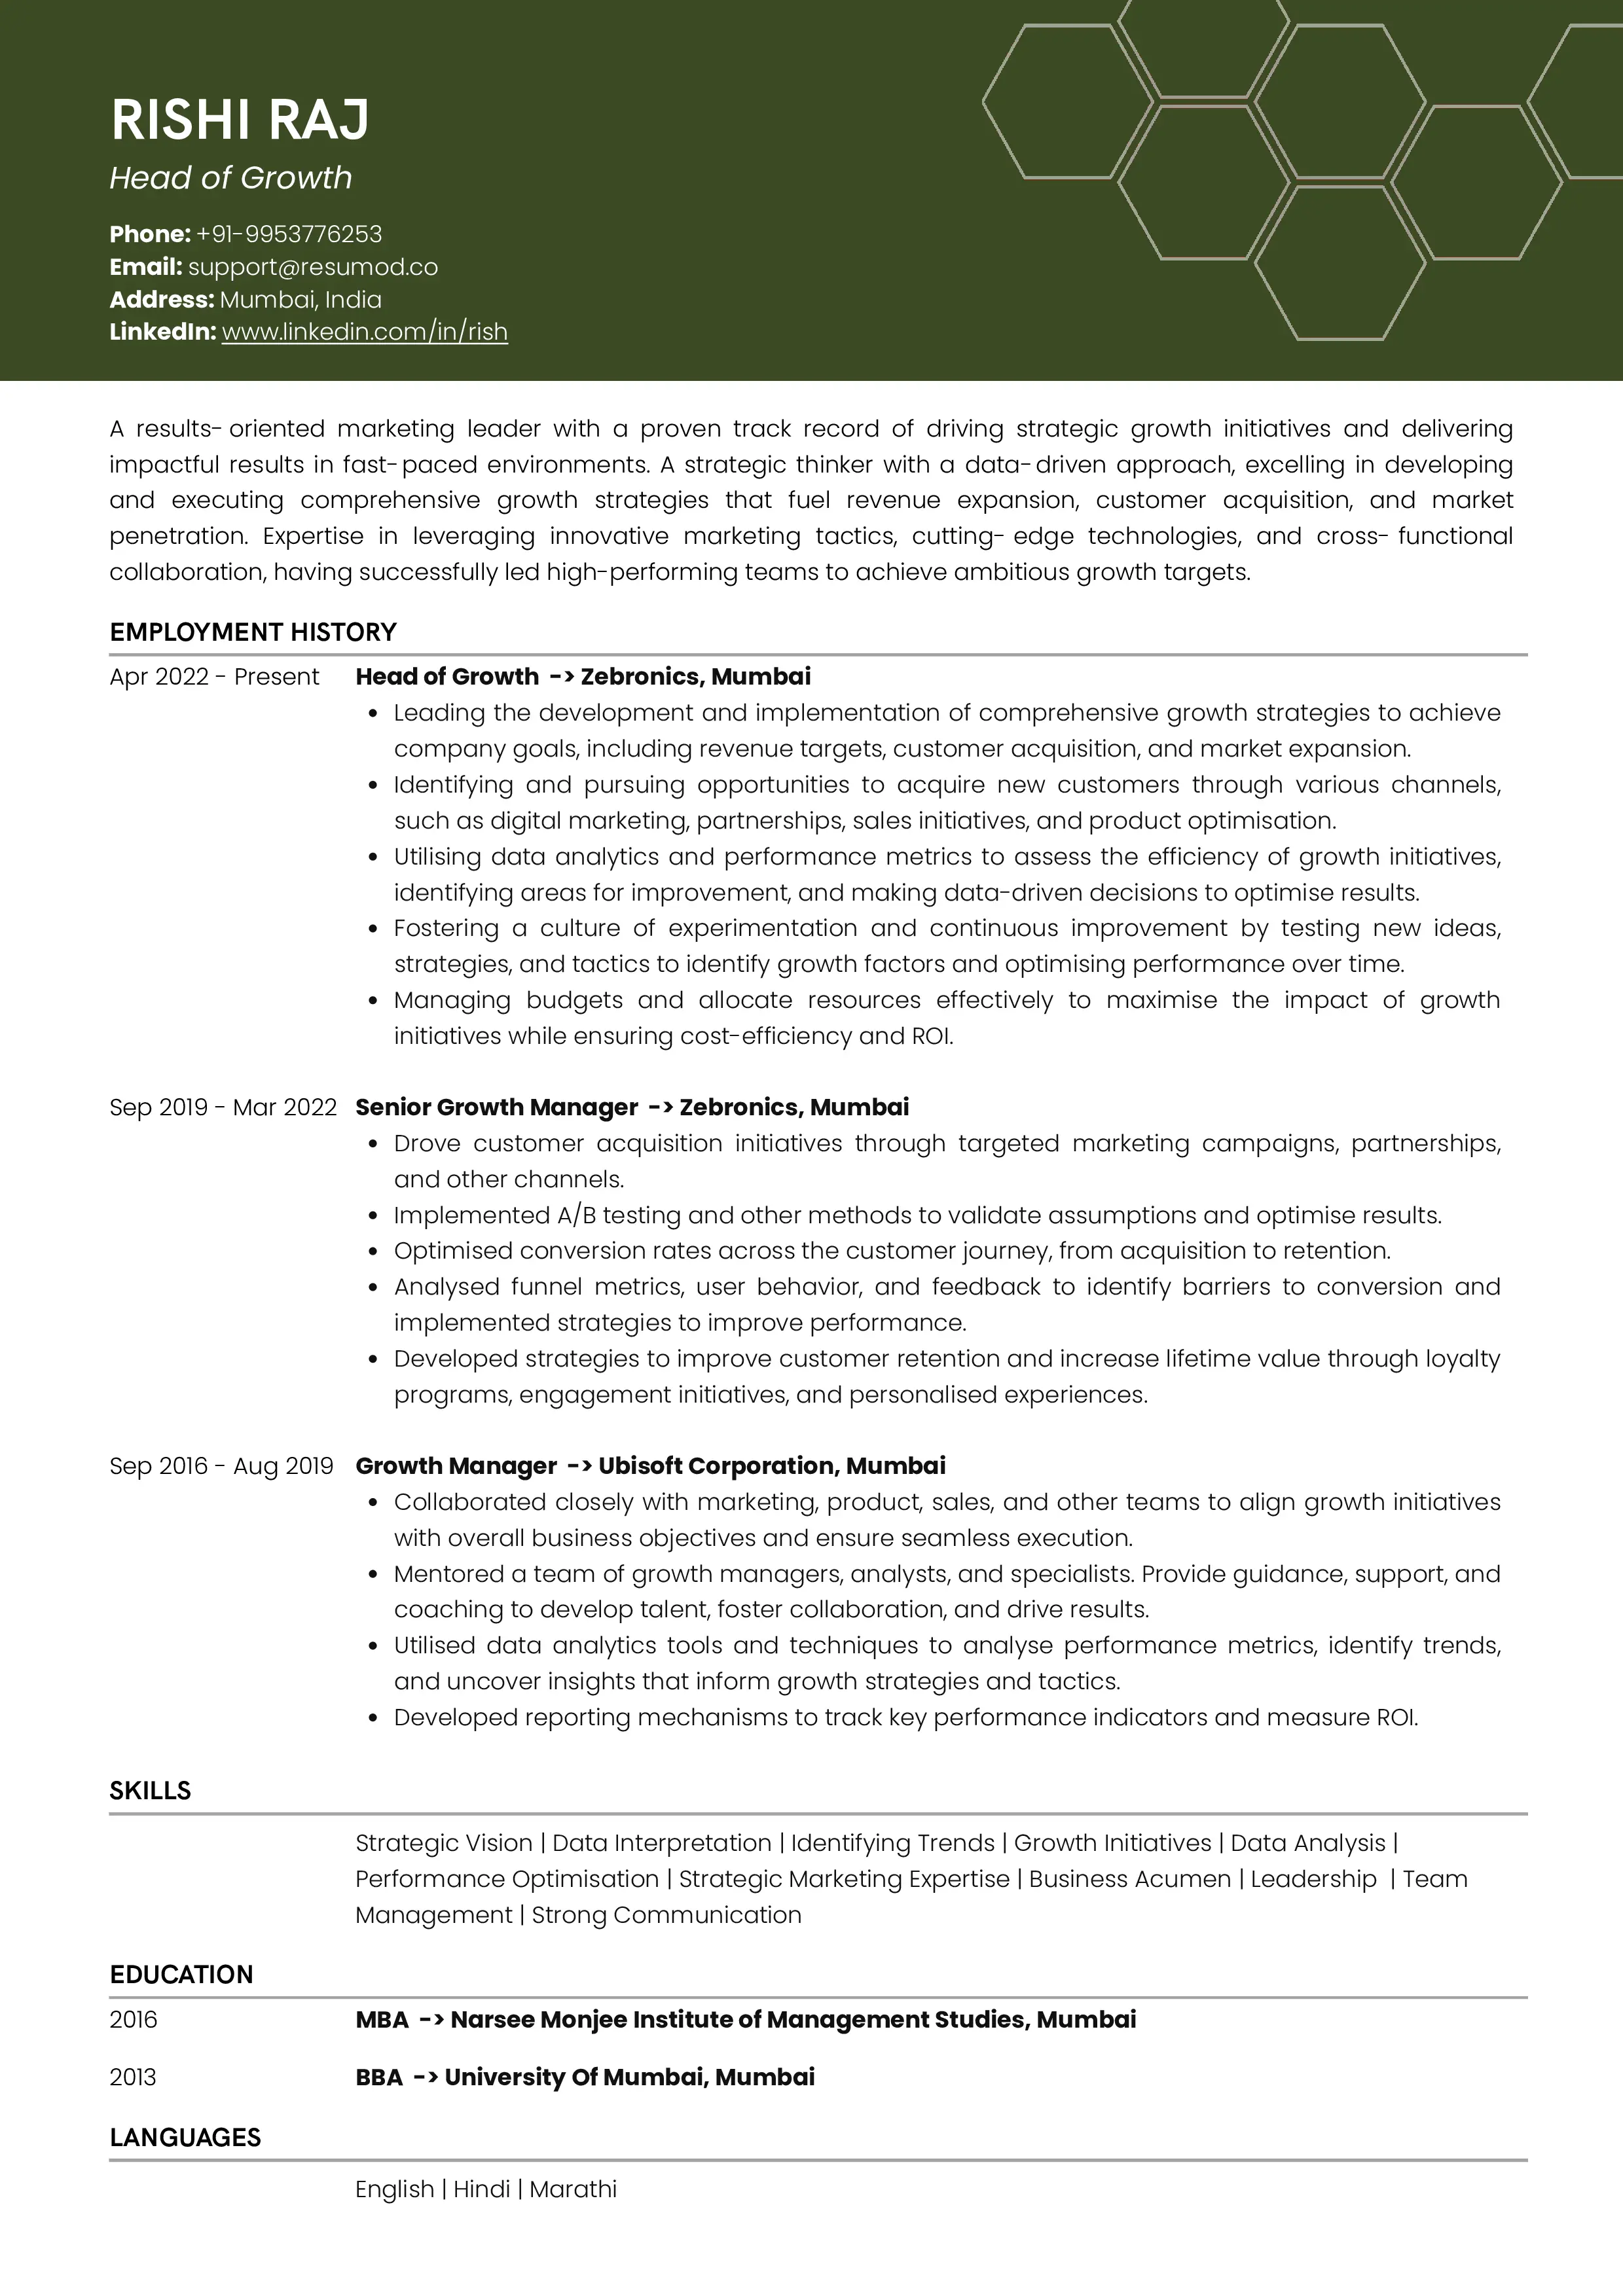 Sample Resume of Head of Business Growth | Free Resume Templates & Samples on Resumod.co